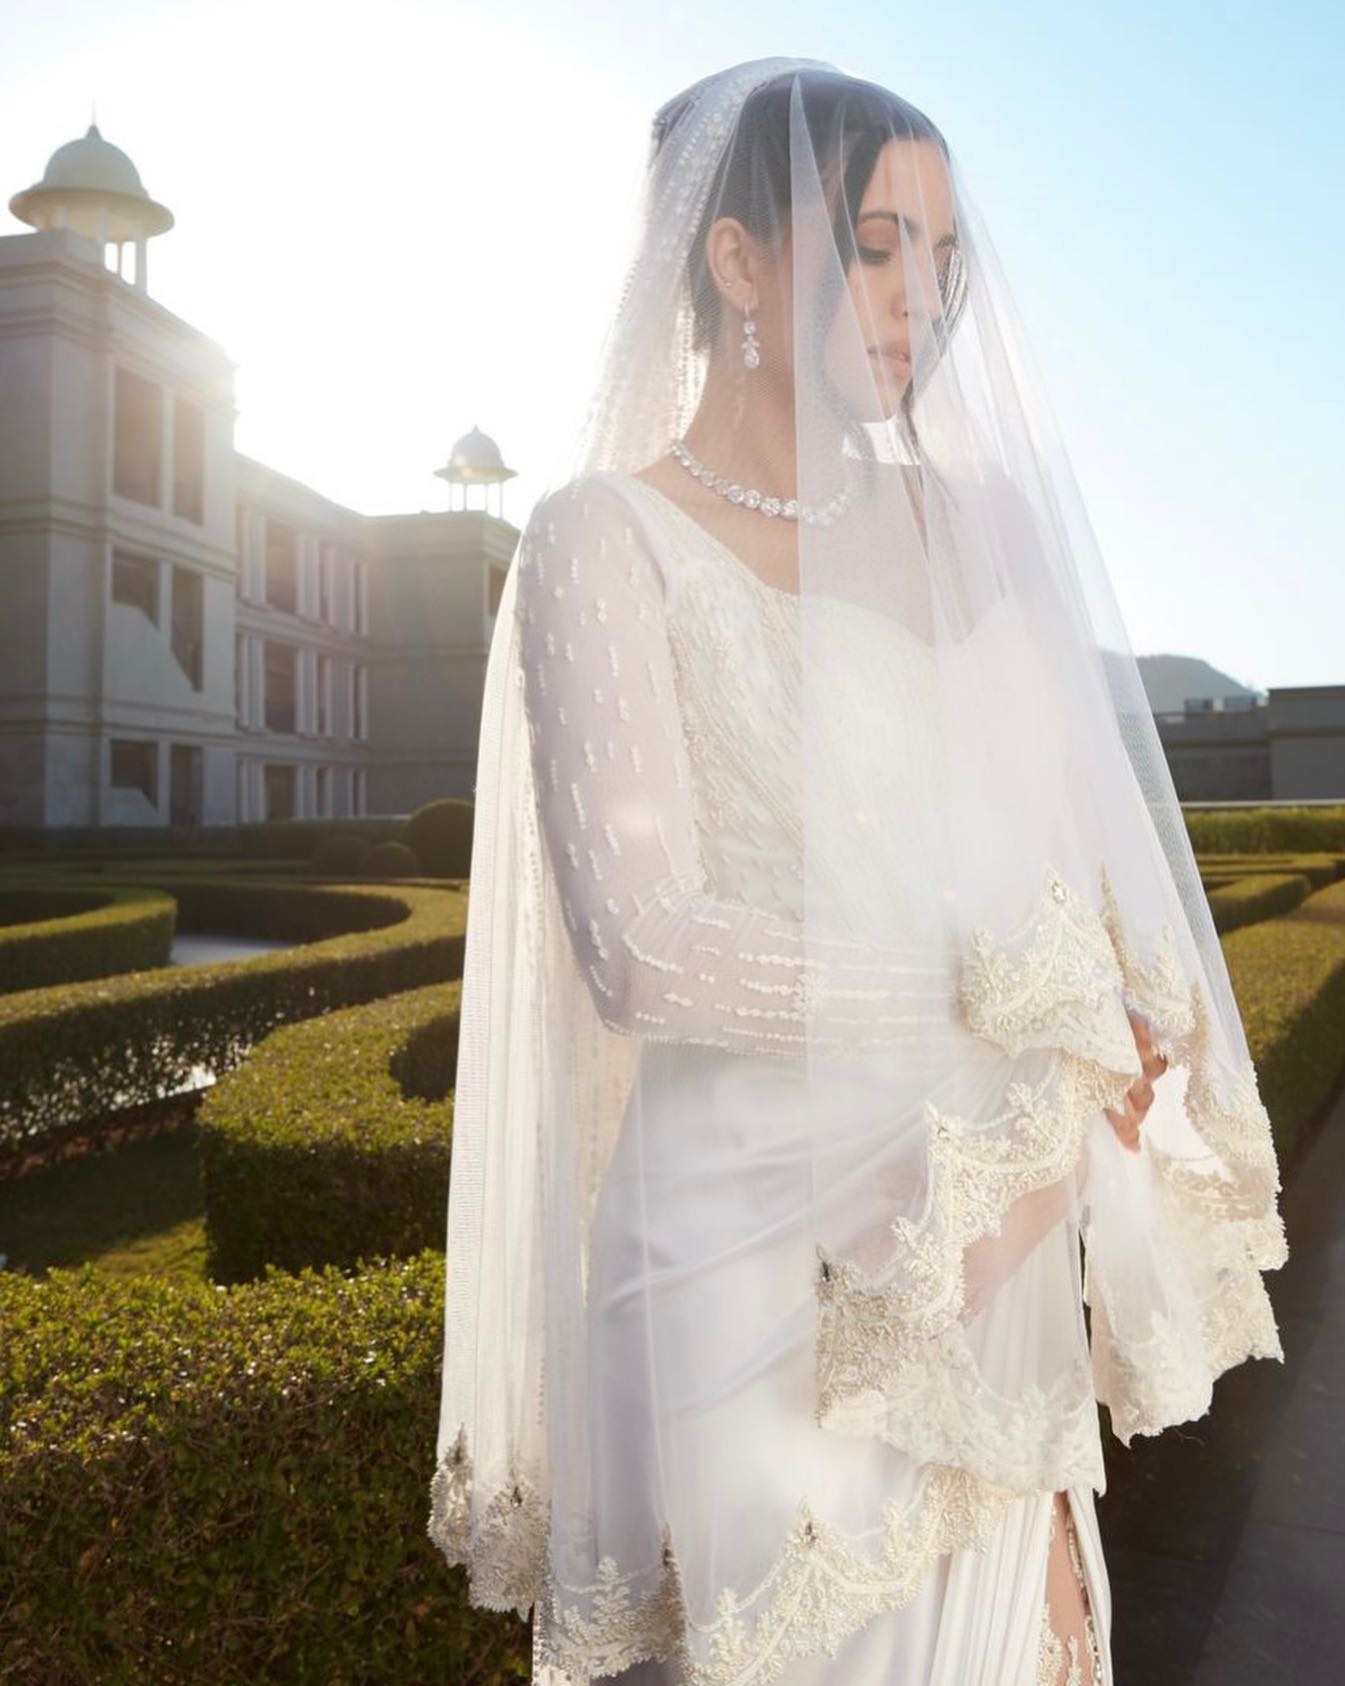 13 Celebrity Brides Who Wore White Outfits